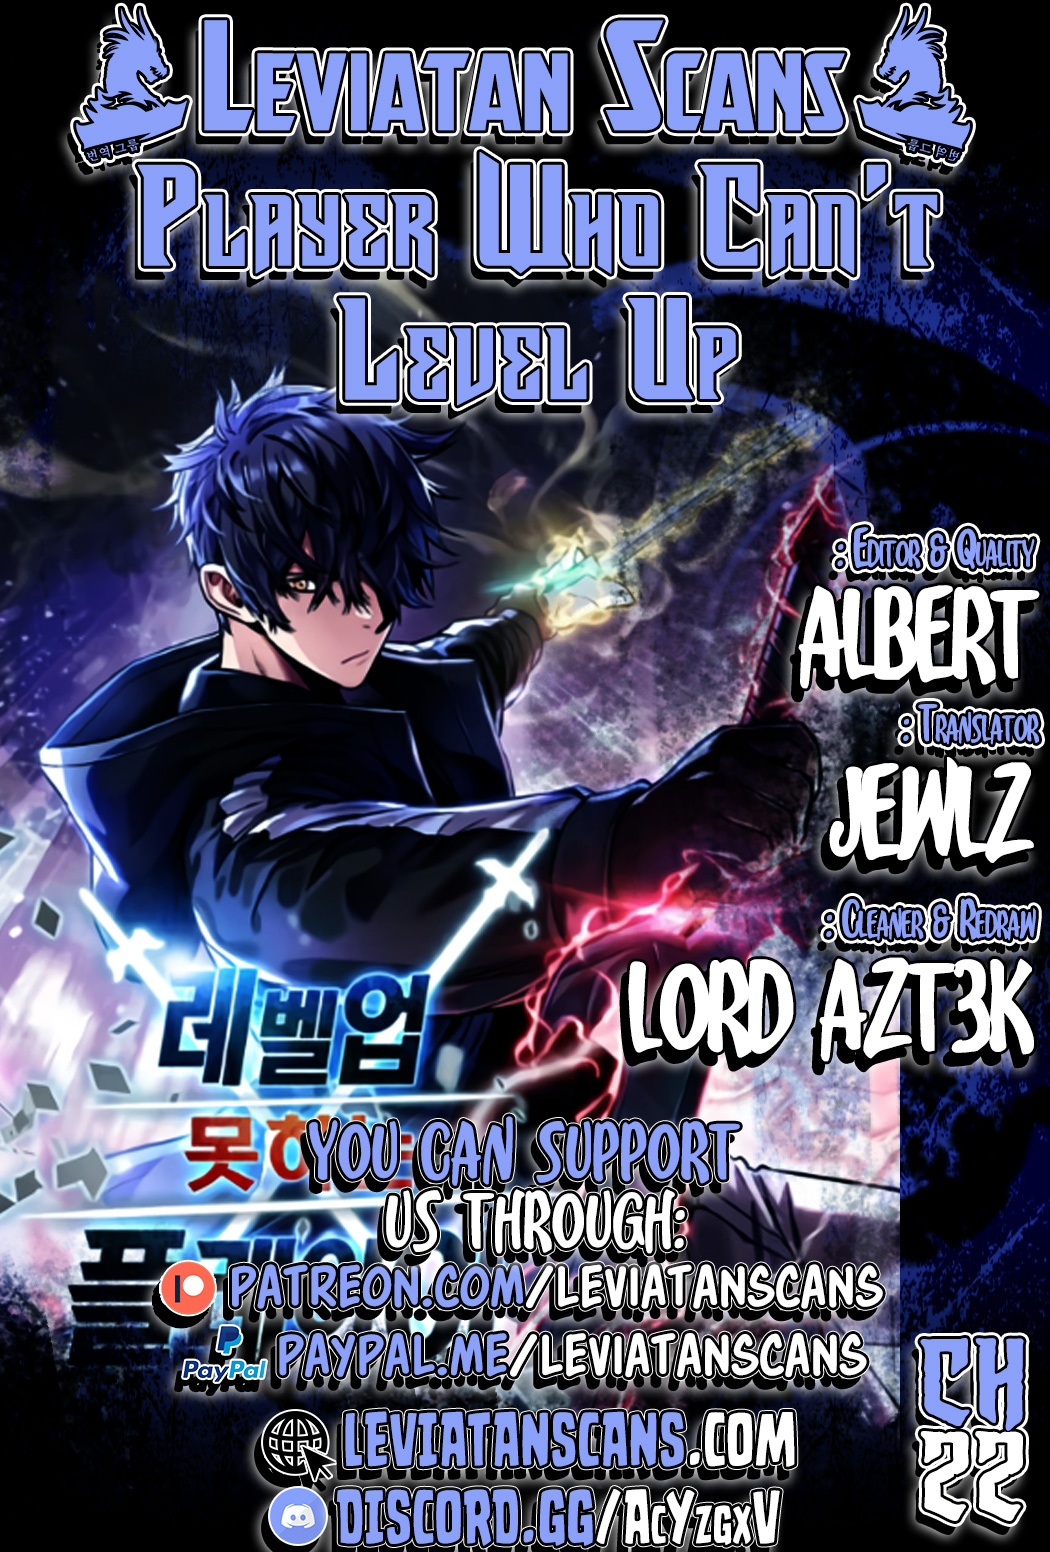 The Player That Can't Level Up - Chapter 2550 - Image 1